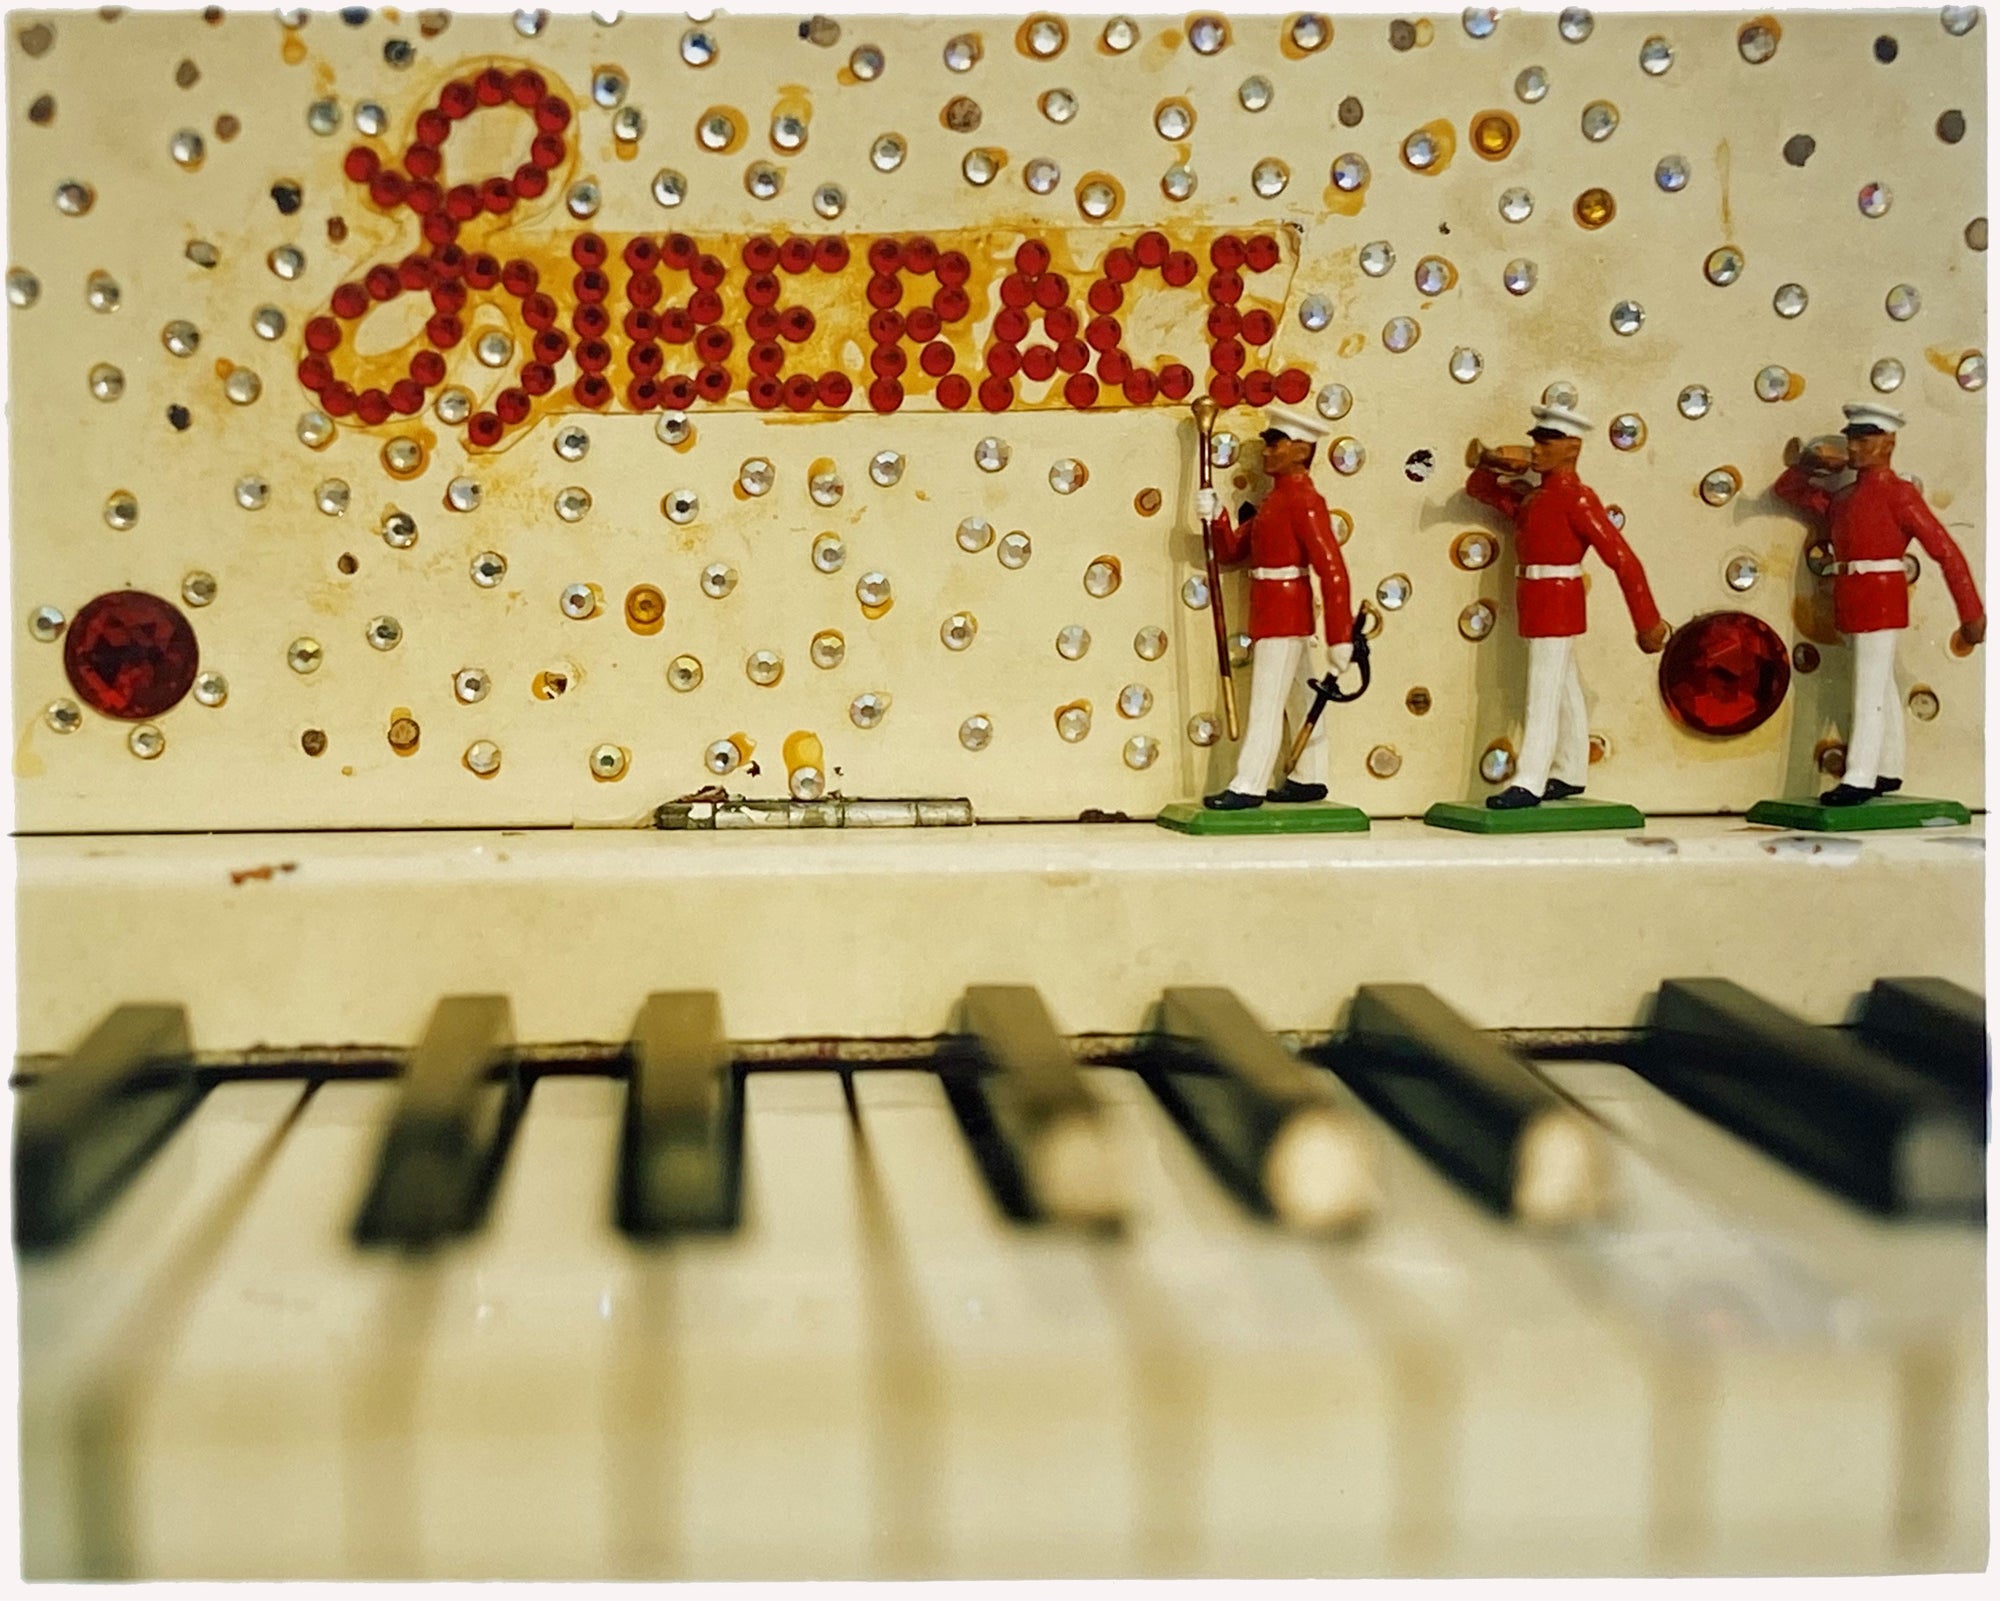 Liberace's Piano, part of Richard Heeps 'Dream in Colour' Series, it has an archetypal Las Vegas feel, featuring marching band and piano keys.